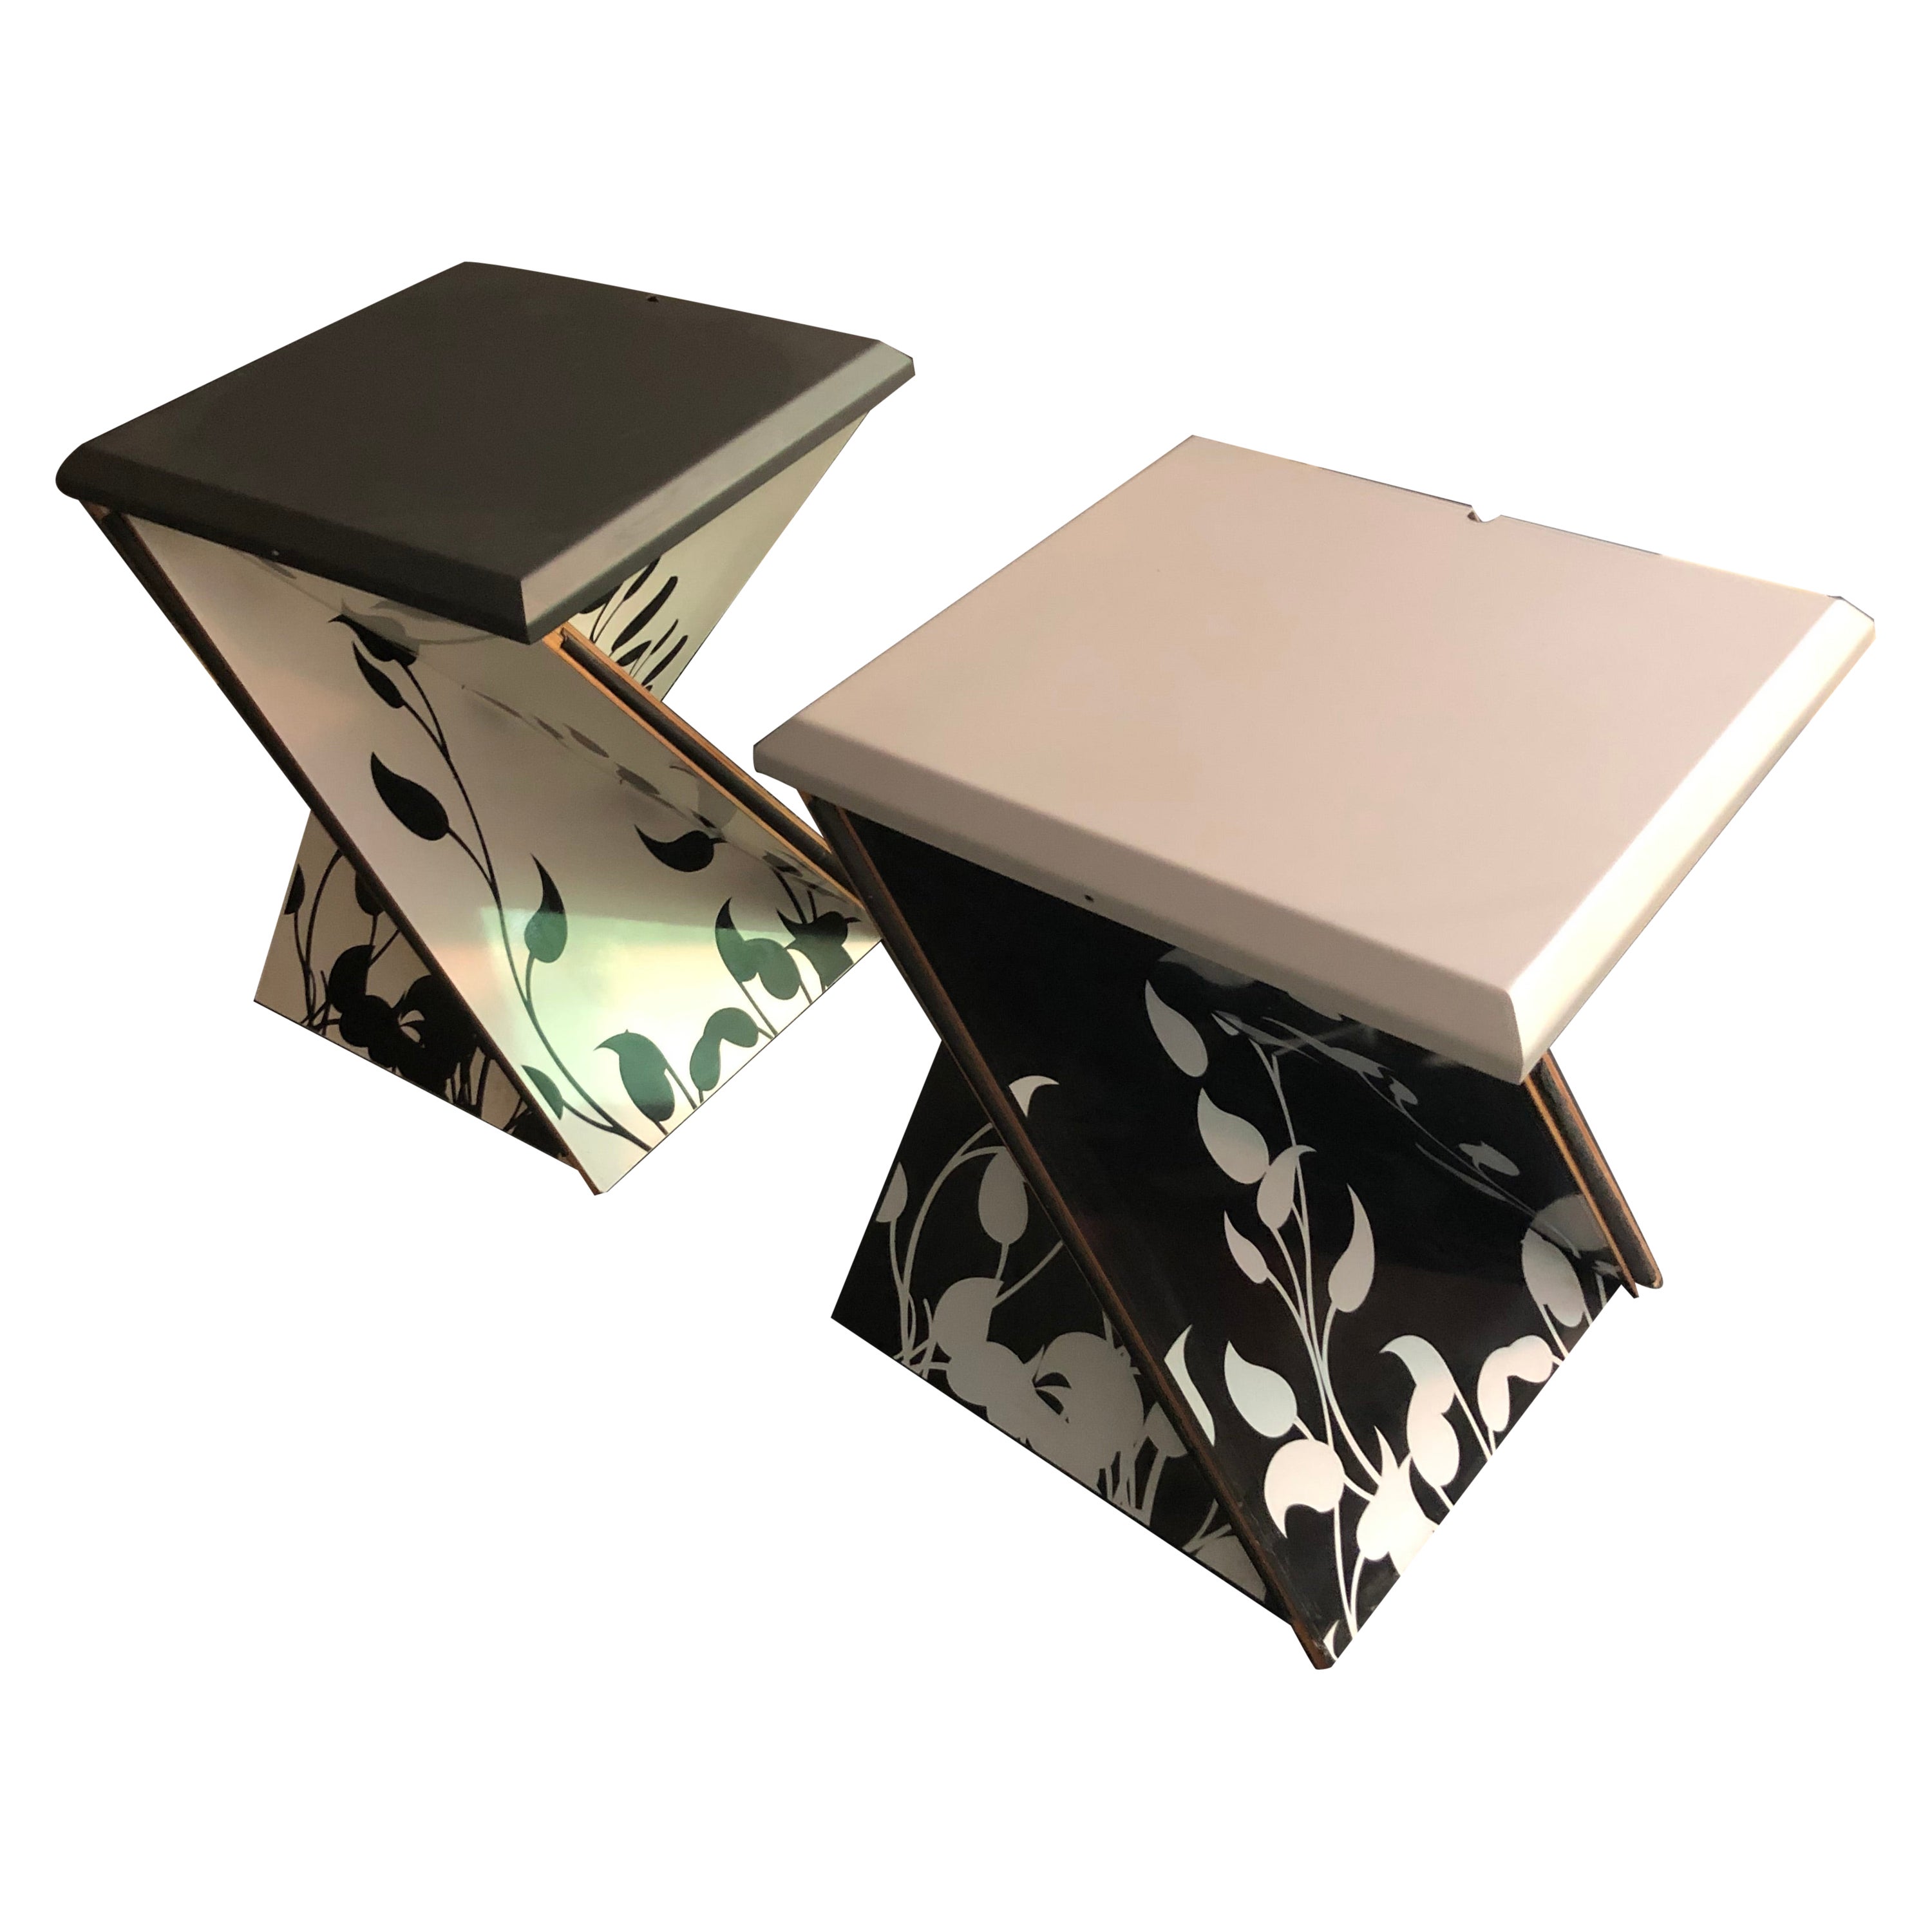 Pair of Modern Kada Metal Folding Square Danese Milano End Tables or Stools